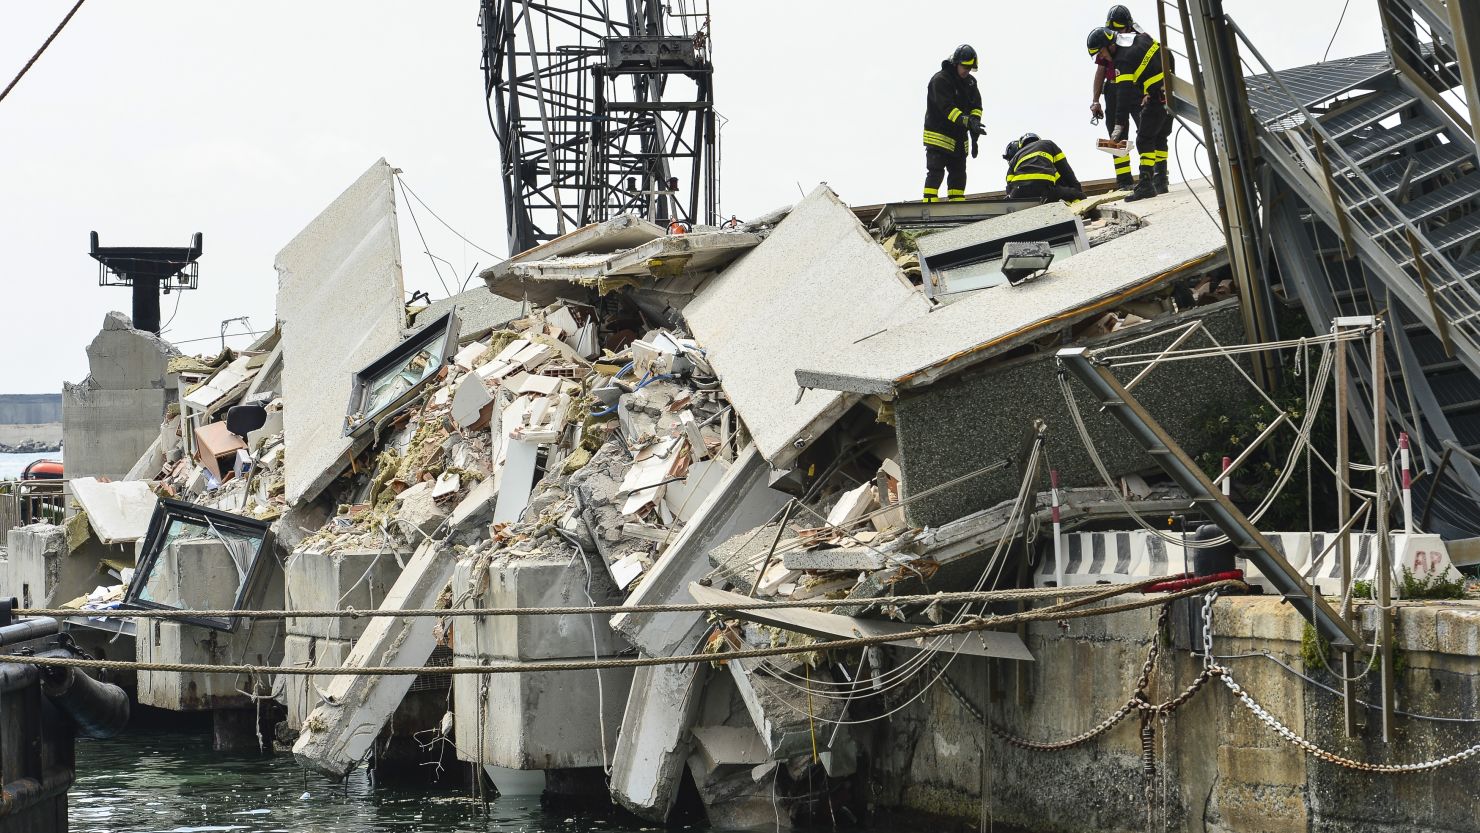 Rescue workers inspect the scene of a damaged control tower in the port of Genoa on May 8, 2013.